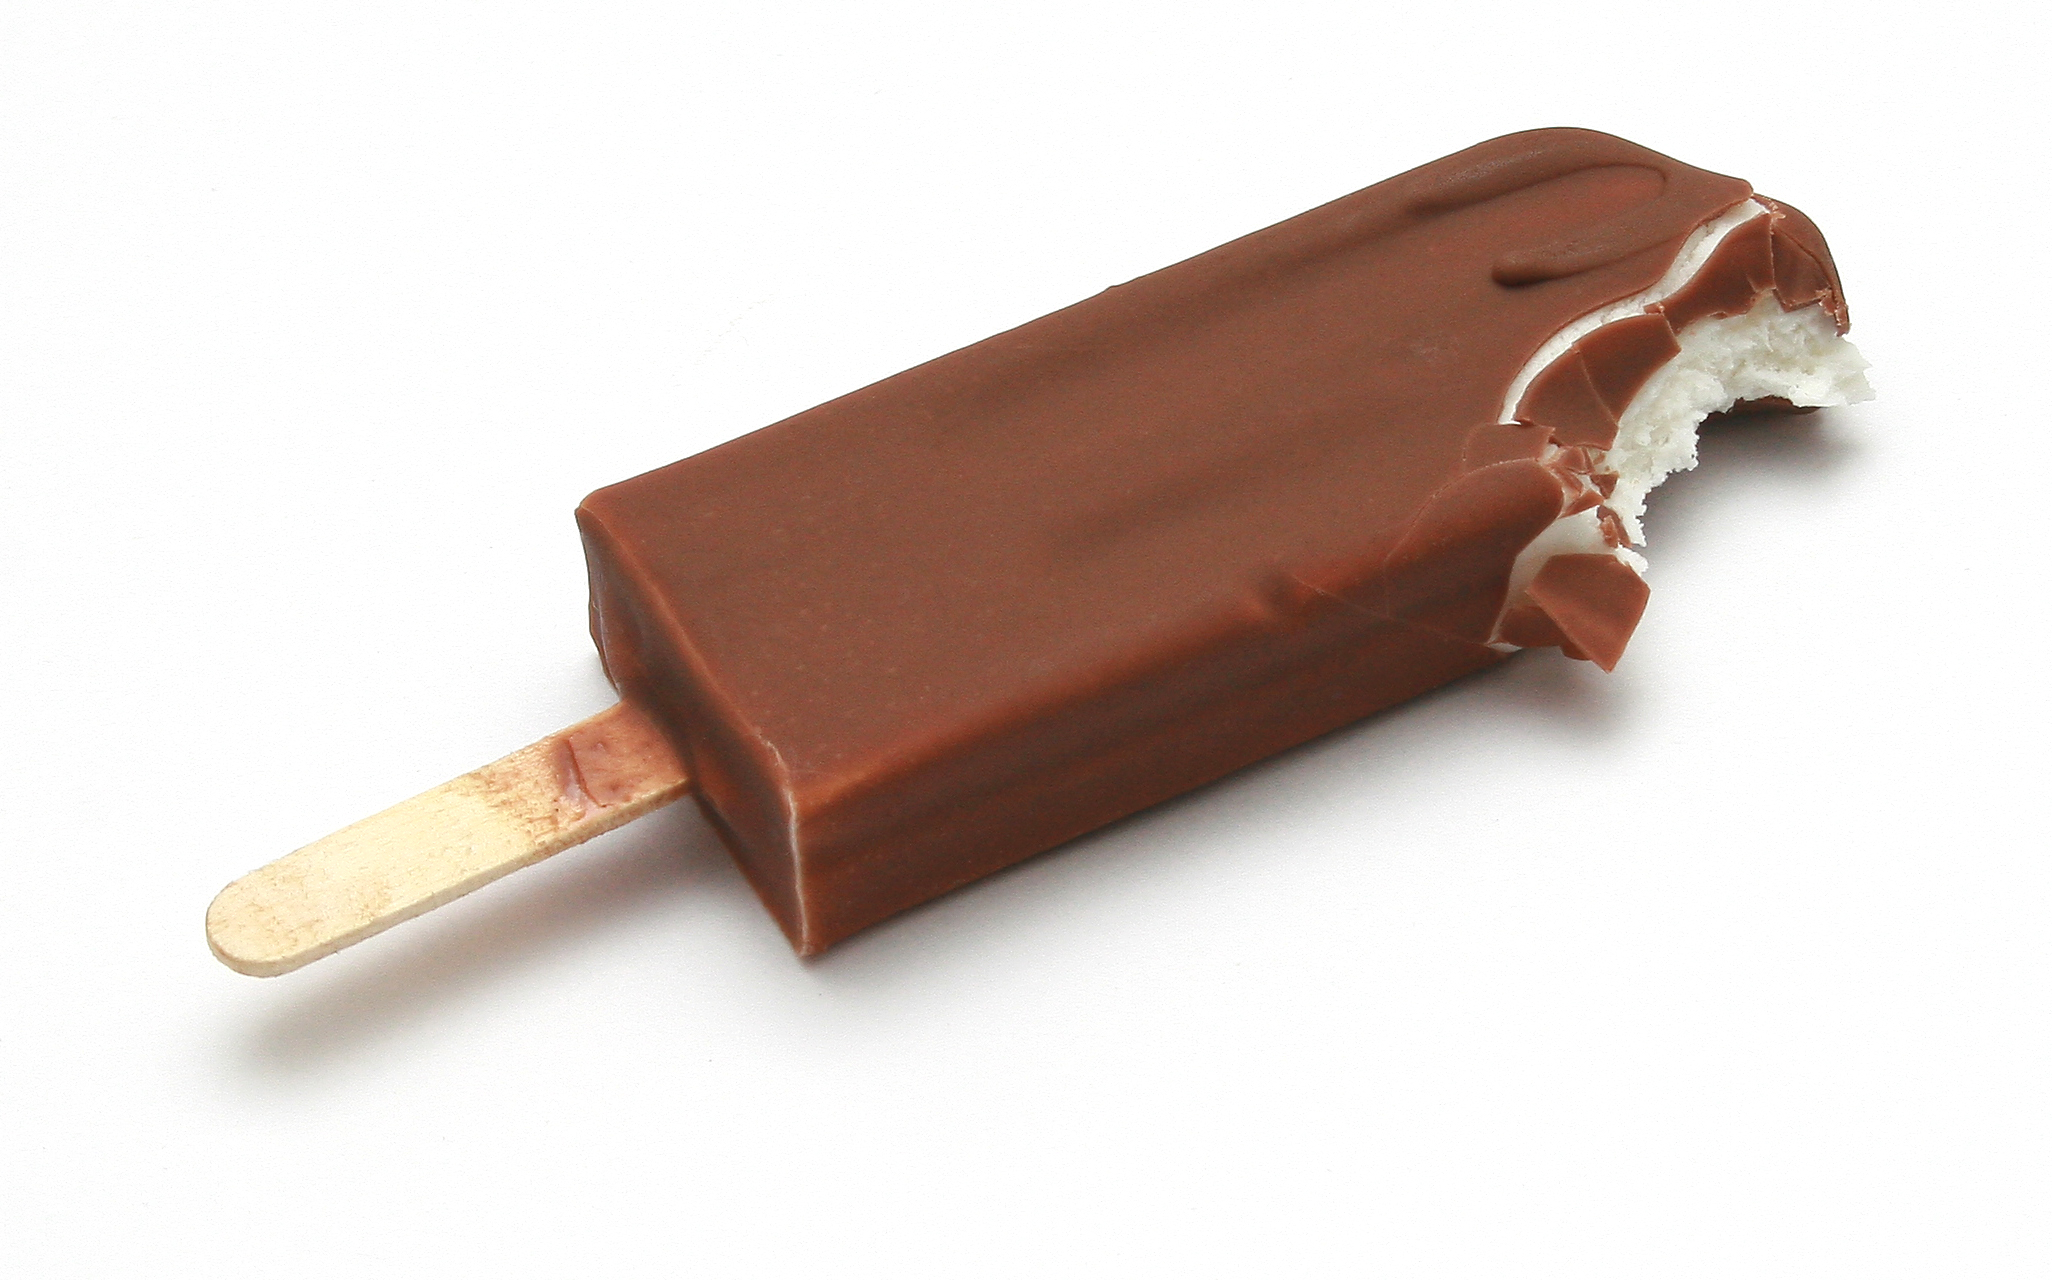 Who invented choc ice on a stick